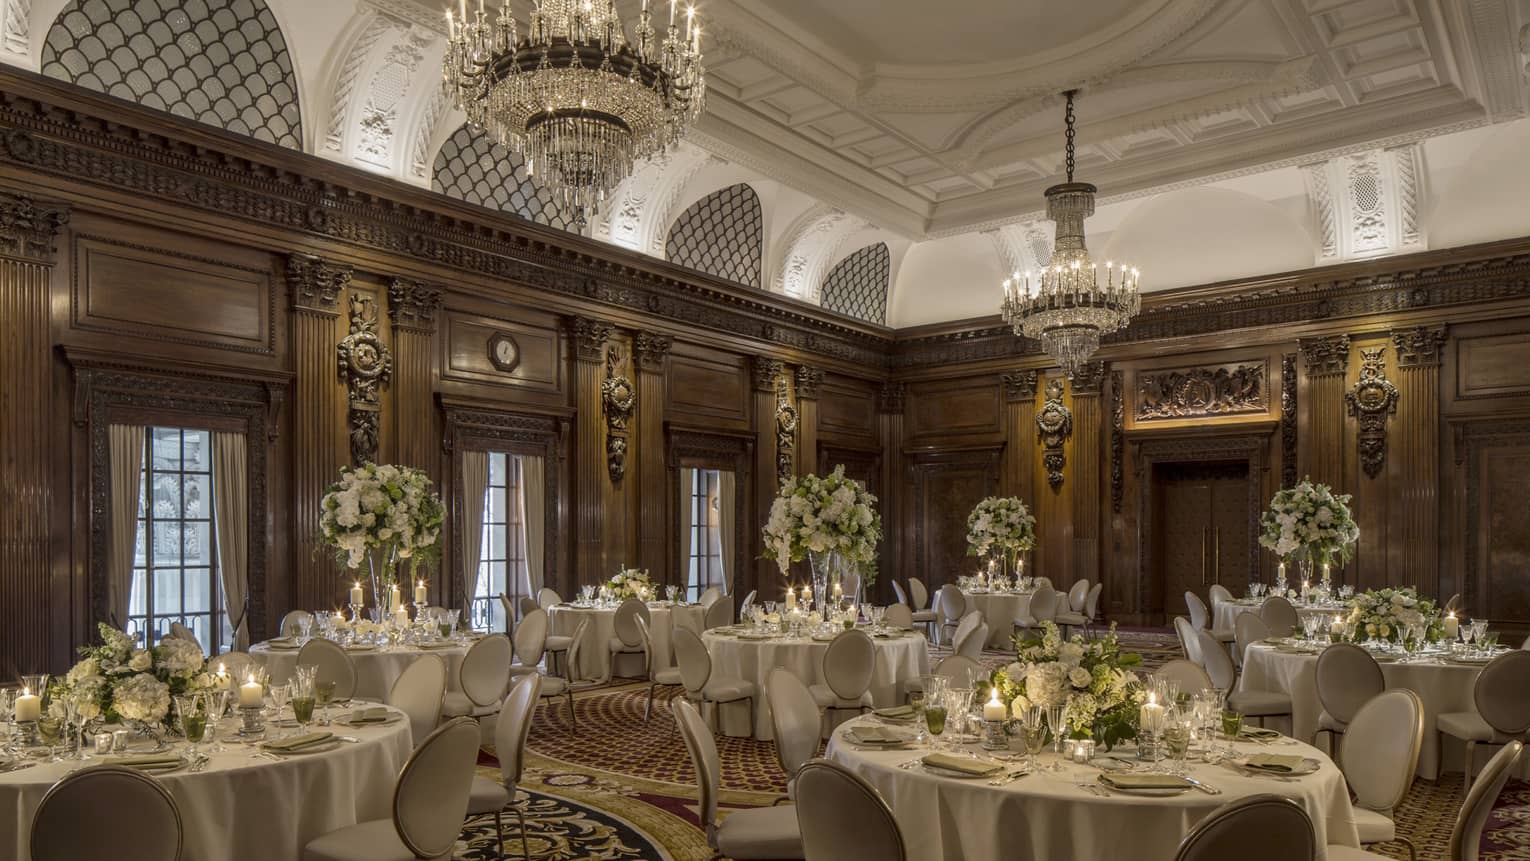 Elegant ballroom with decorative wood walls, crystal chandeliers over round banquet dining tables